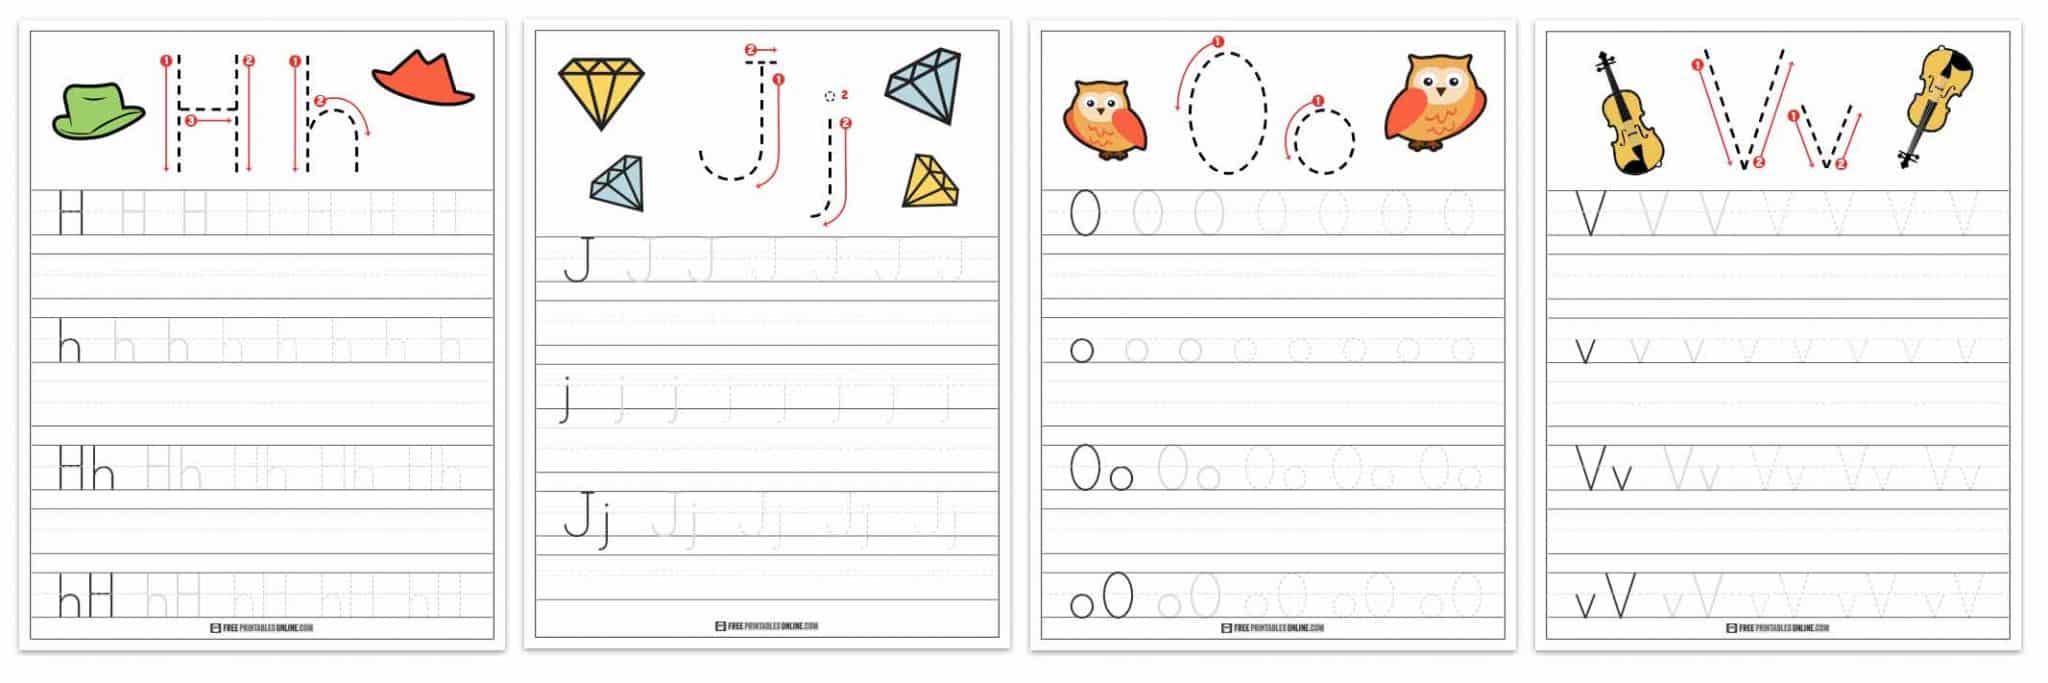 Free Printable Alphabet letter tracing worksheets for writing practice A-Z